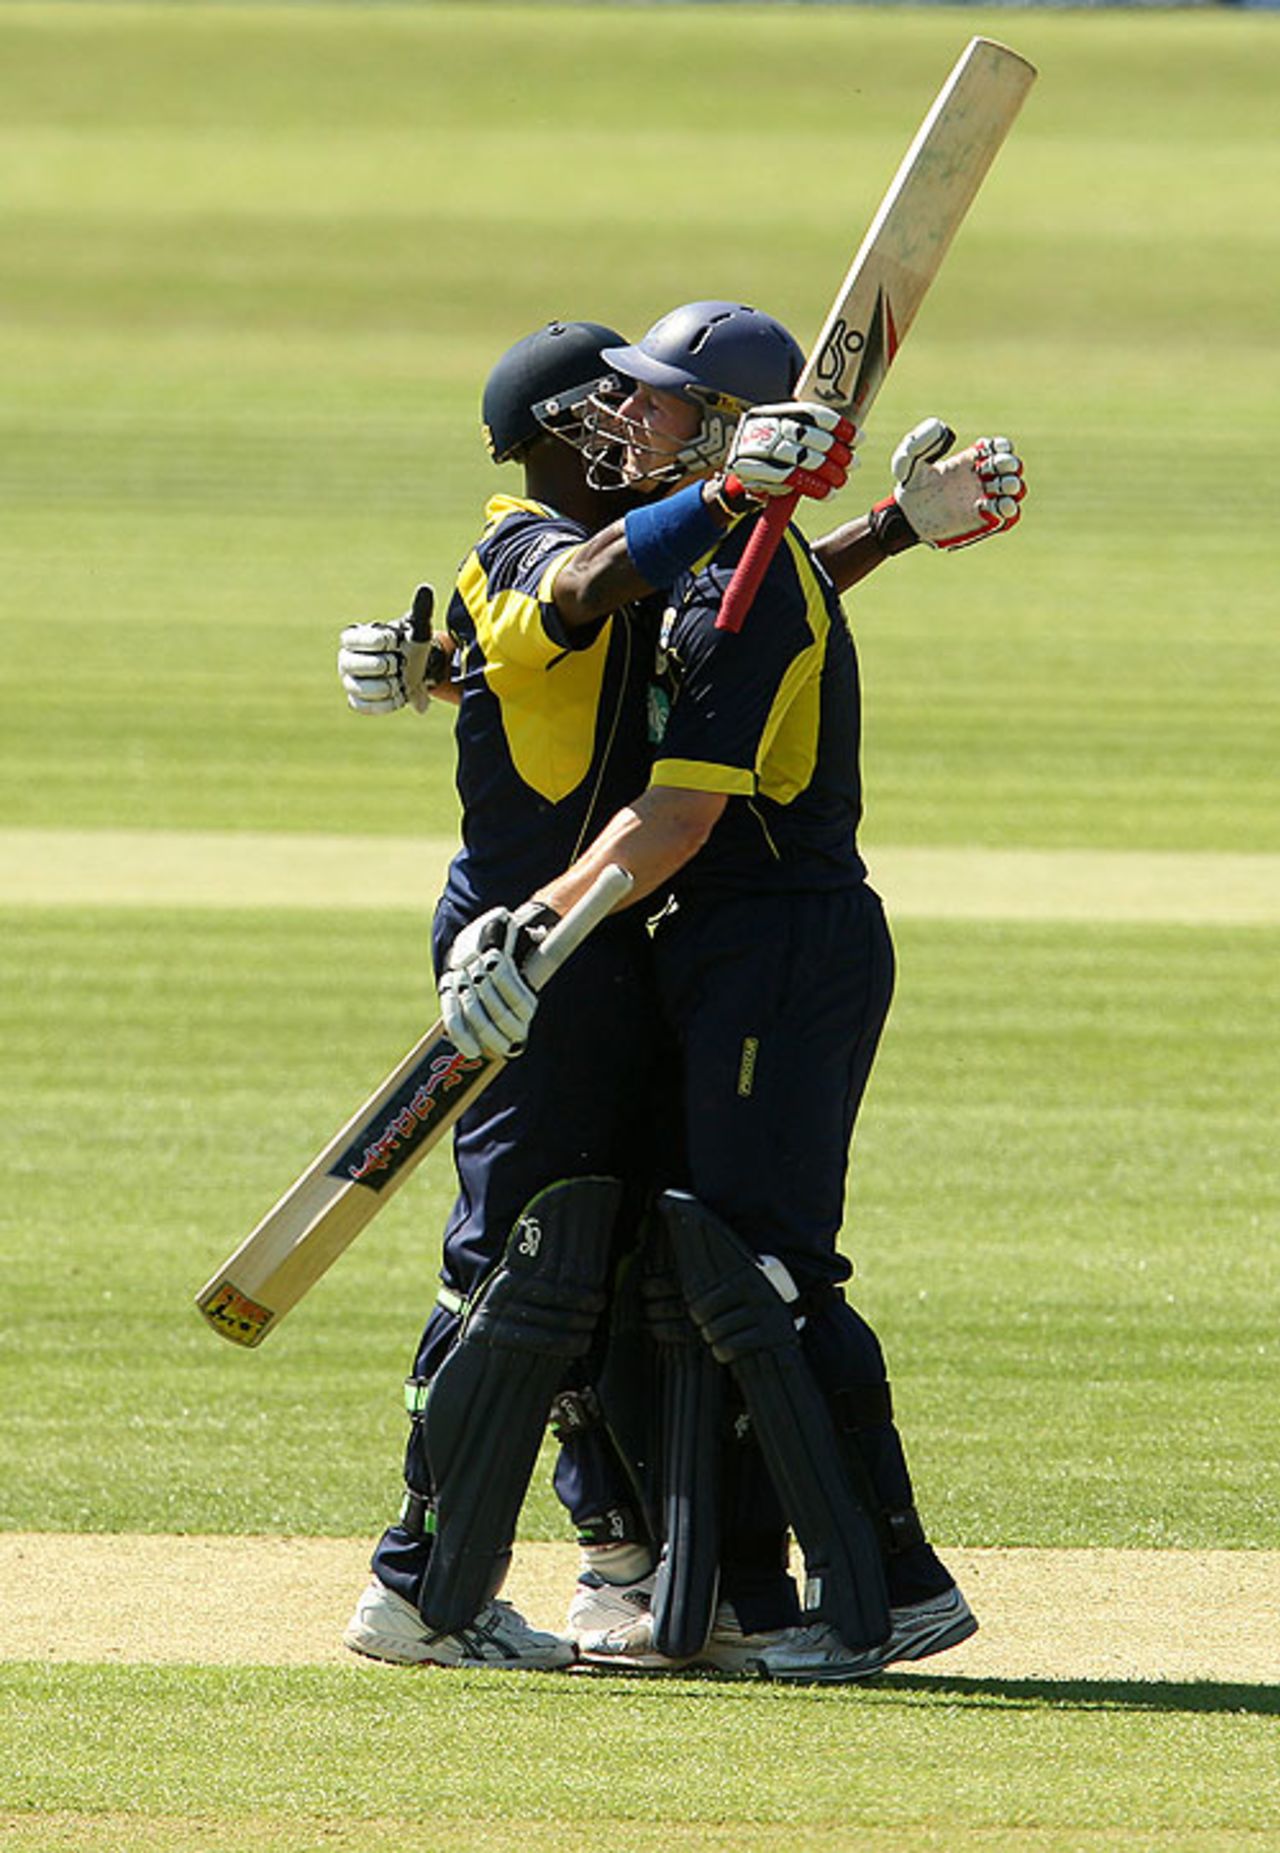 Jimmy Adams and Michael Carberry both made hundreds as Hampshire scored 341 for 6 against Warwickshire, Warwickshire v Hampshire, Clydesdale Bank 40, May 22, 2010